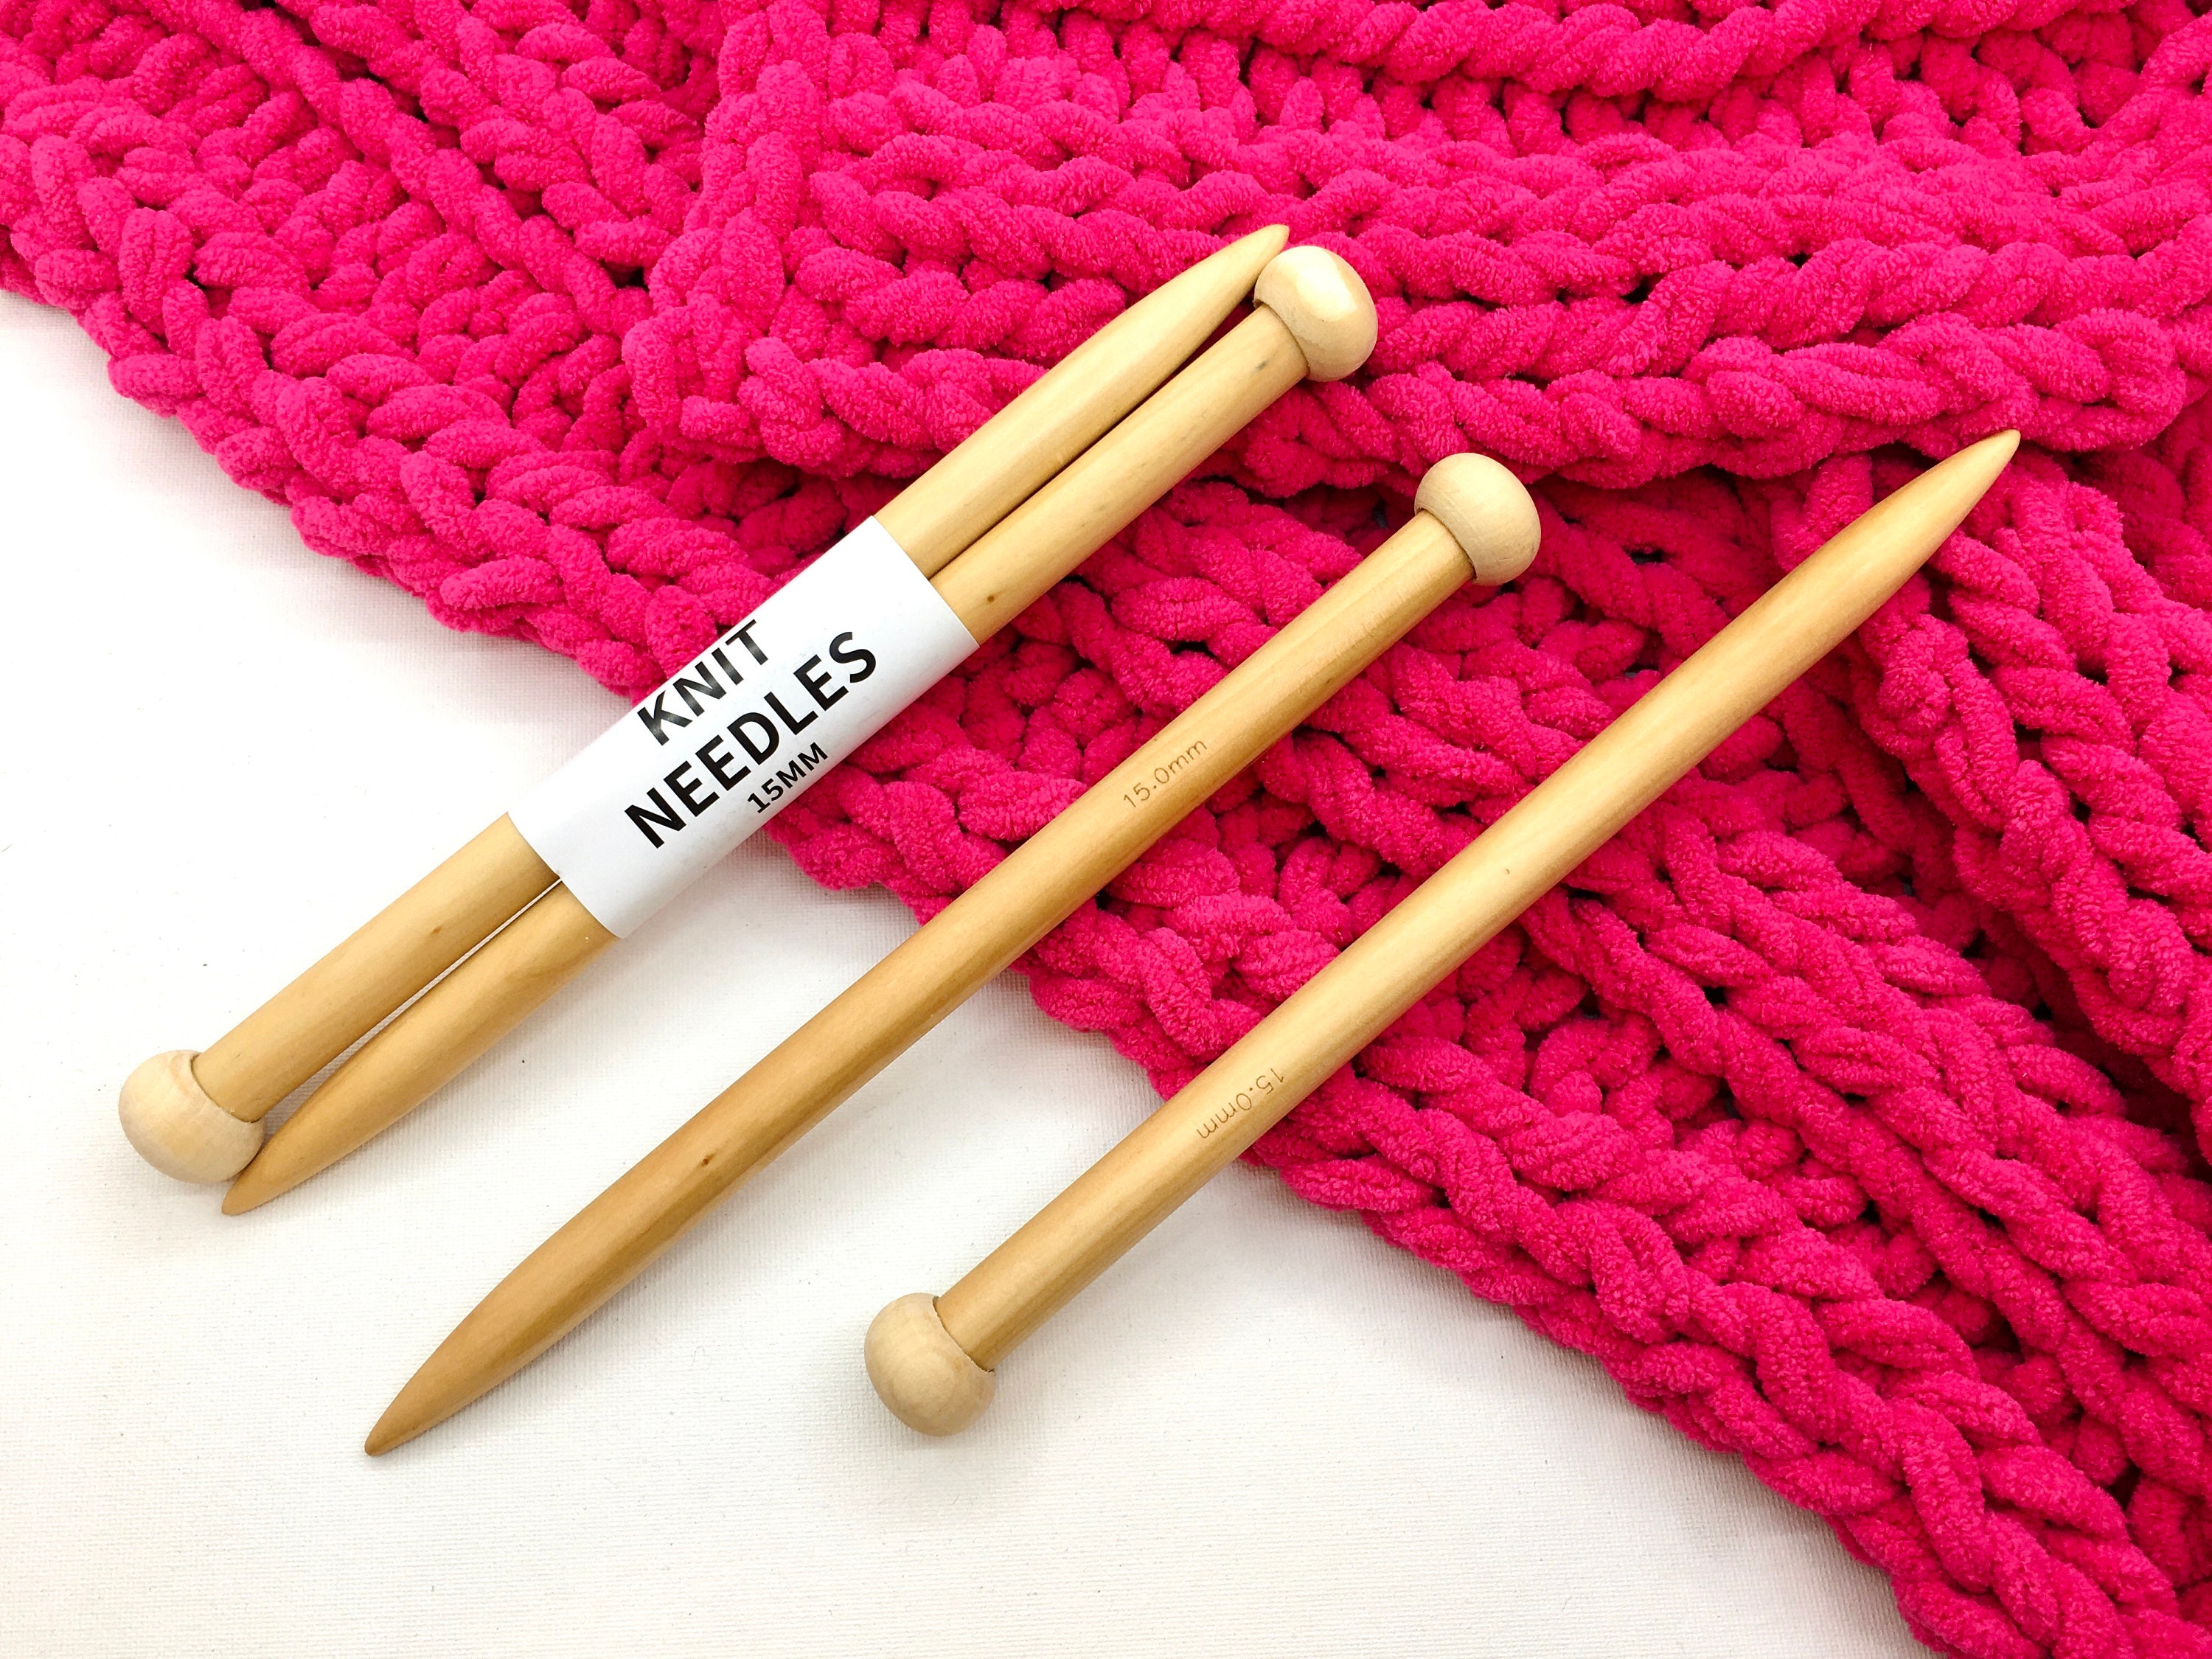 15mm Pair of Beech Knitting Needles, 25cm Long, Suitable for Super